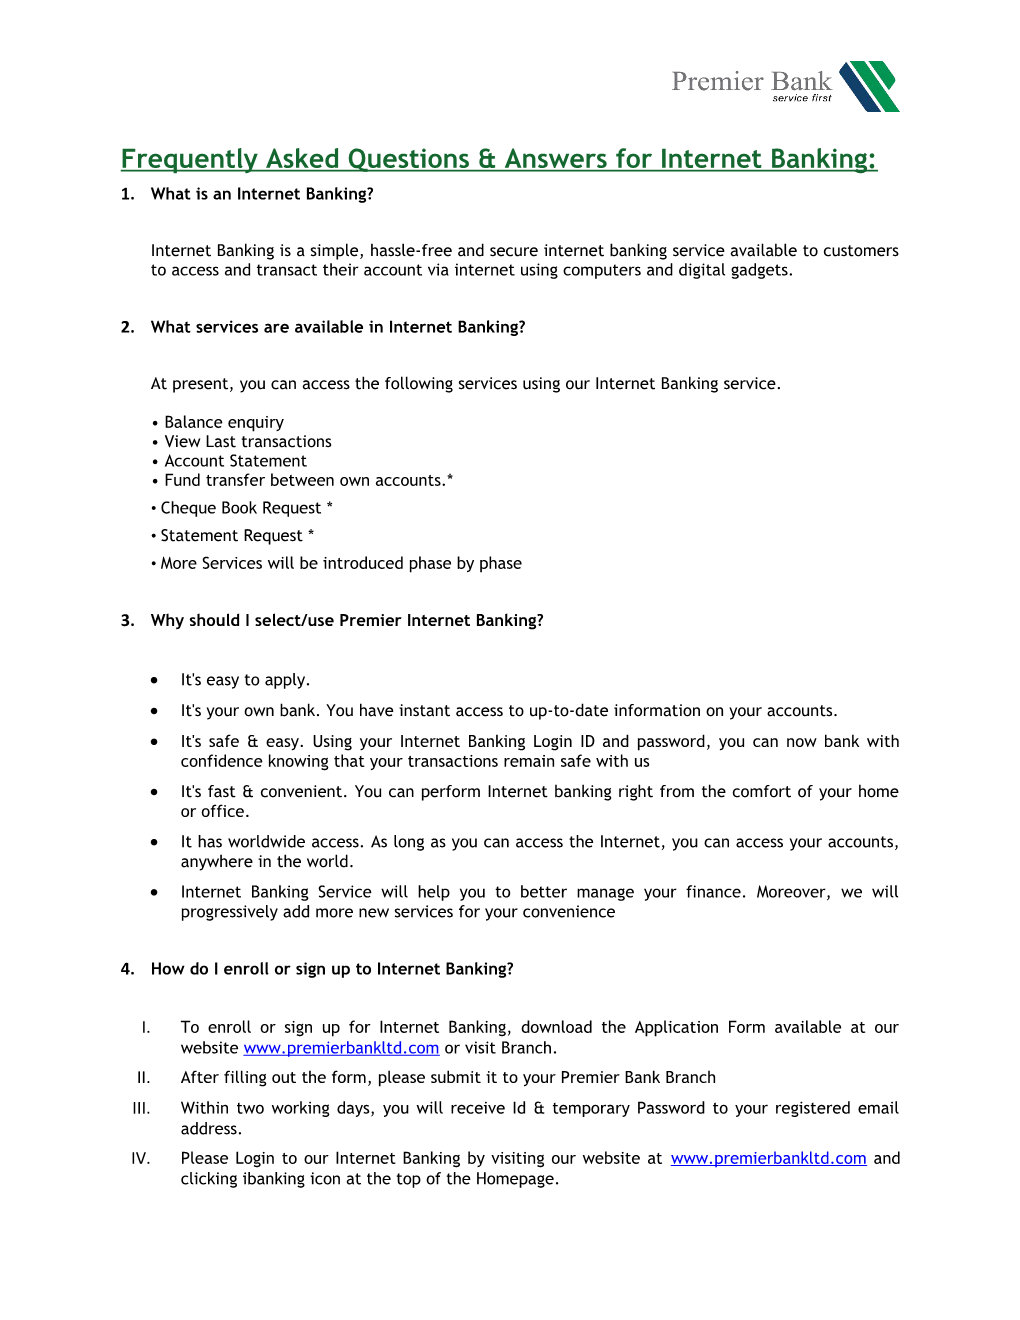 Frequently Asked Questions & Answers for Internet Banking